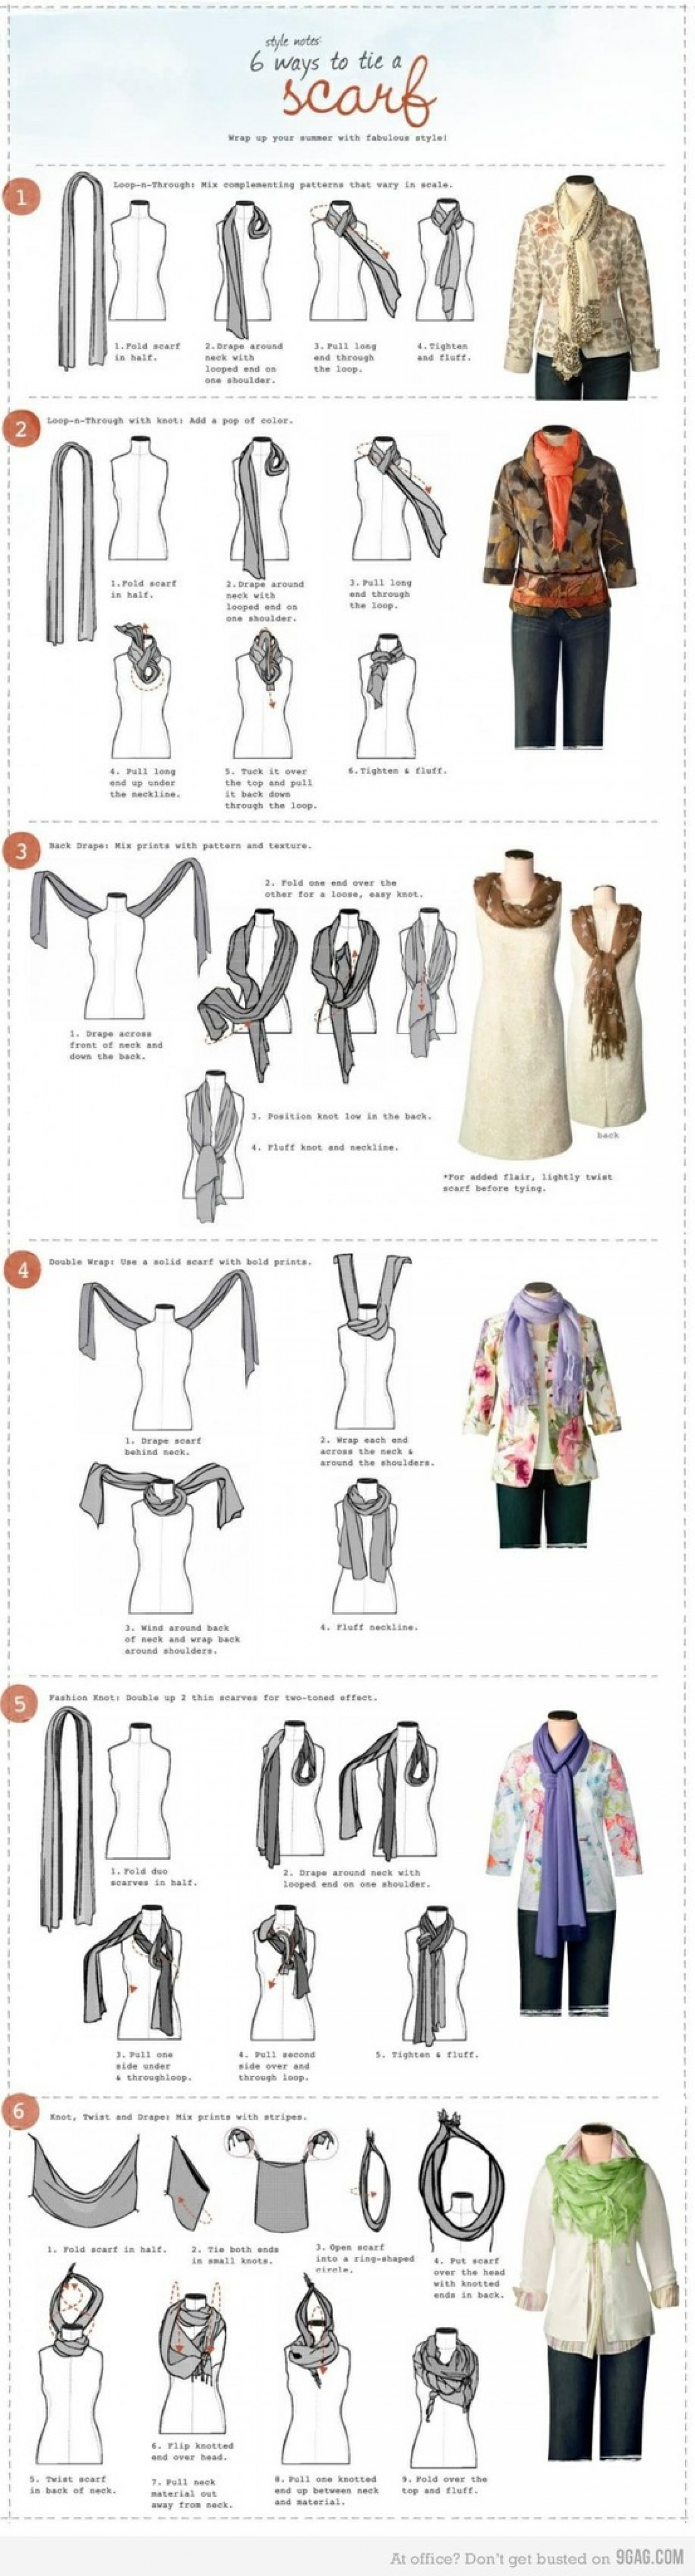 6 Ways To Tie A Scarf Infographic